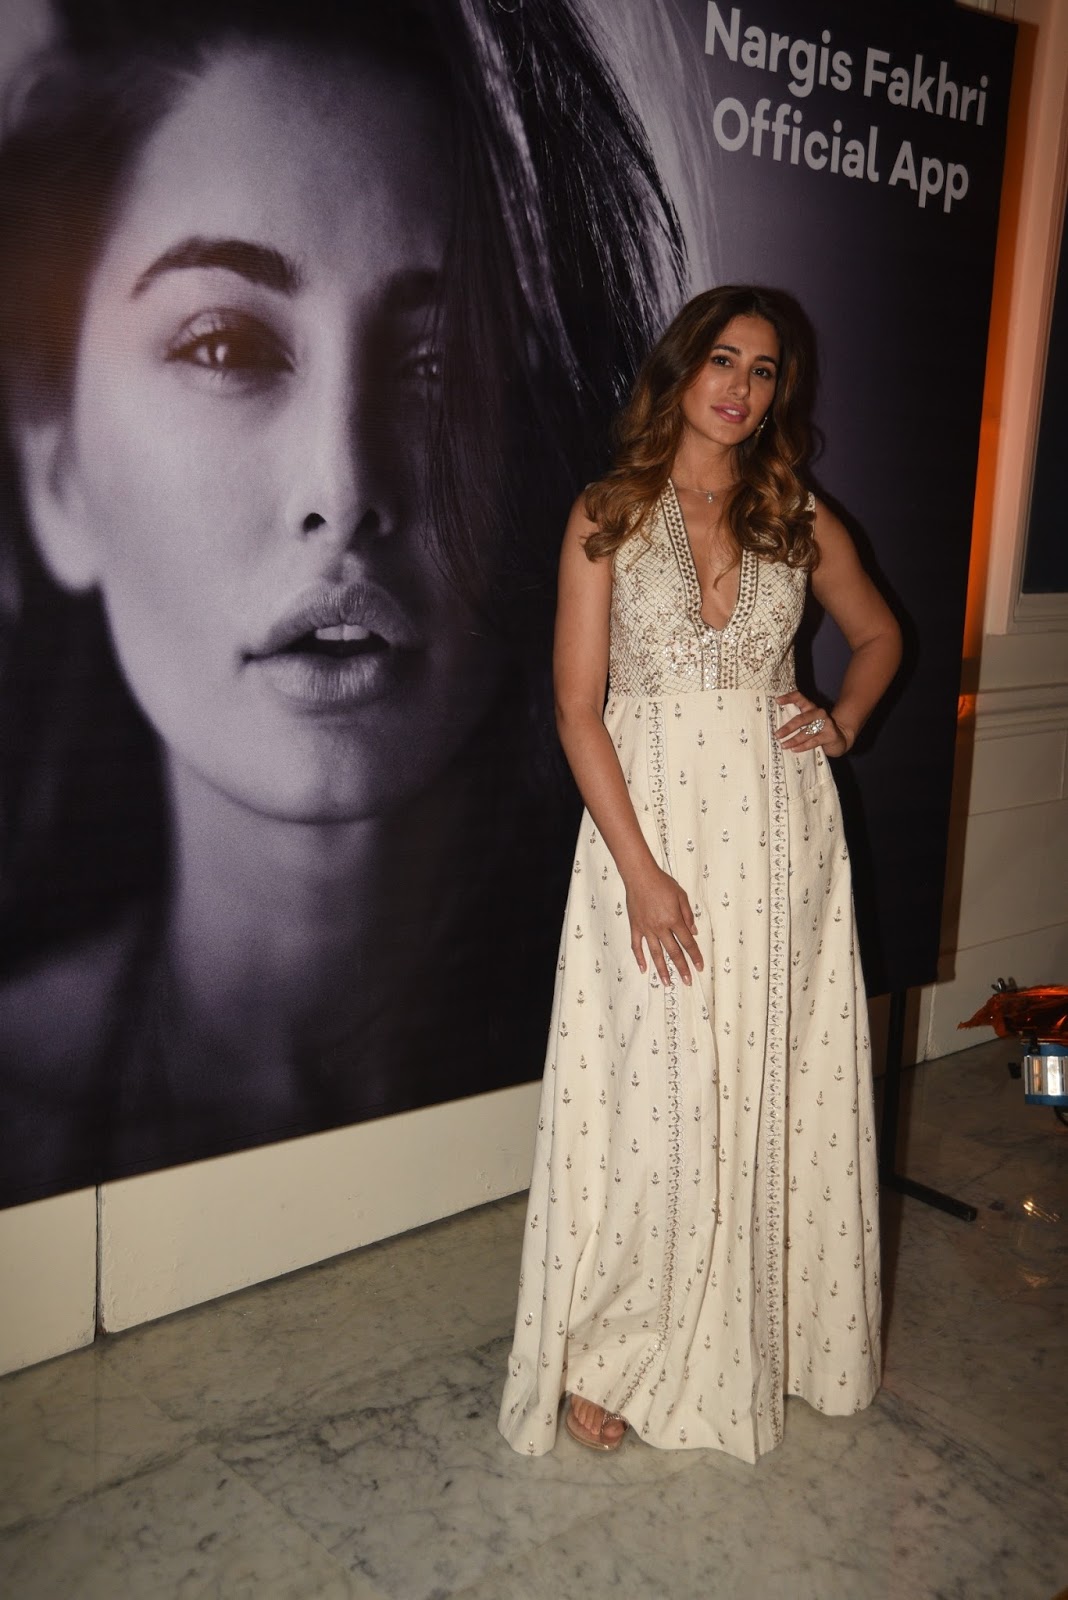 Nargis Fakhri Looks Hot in a White Dress At The Launch Event of Her Own App in Mumbai